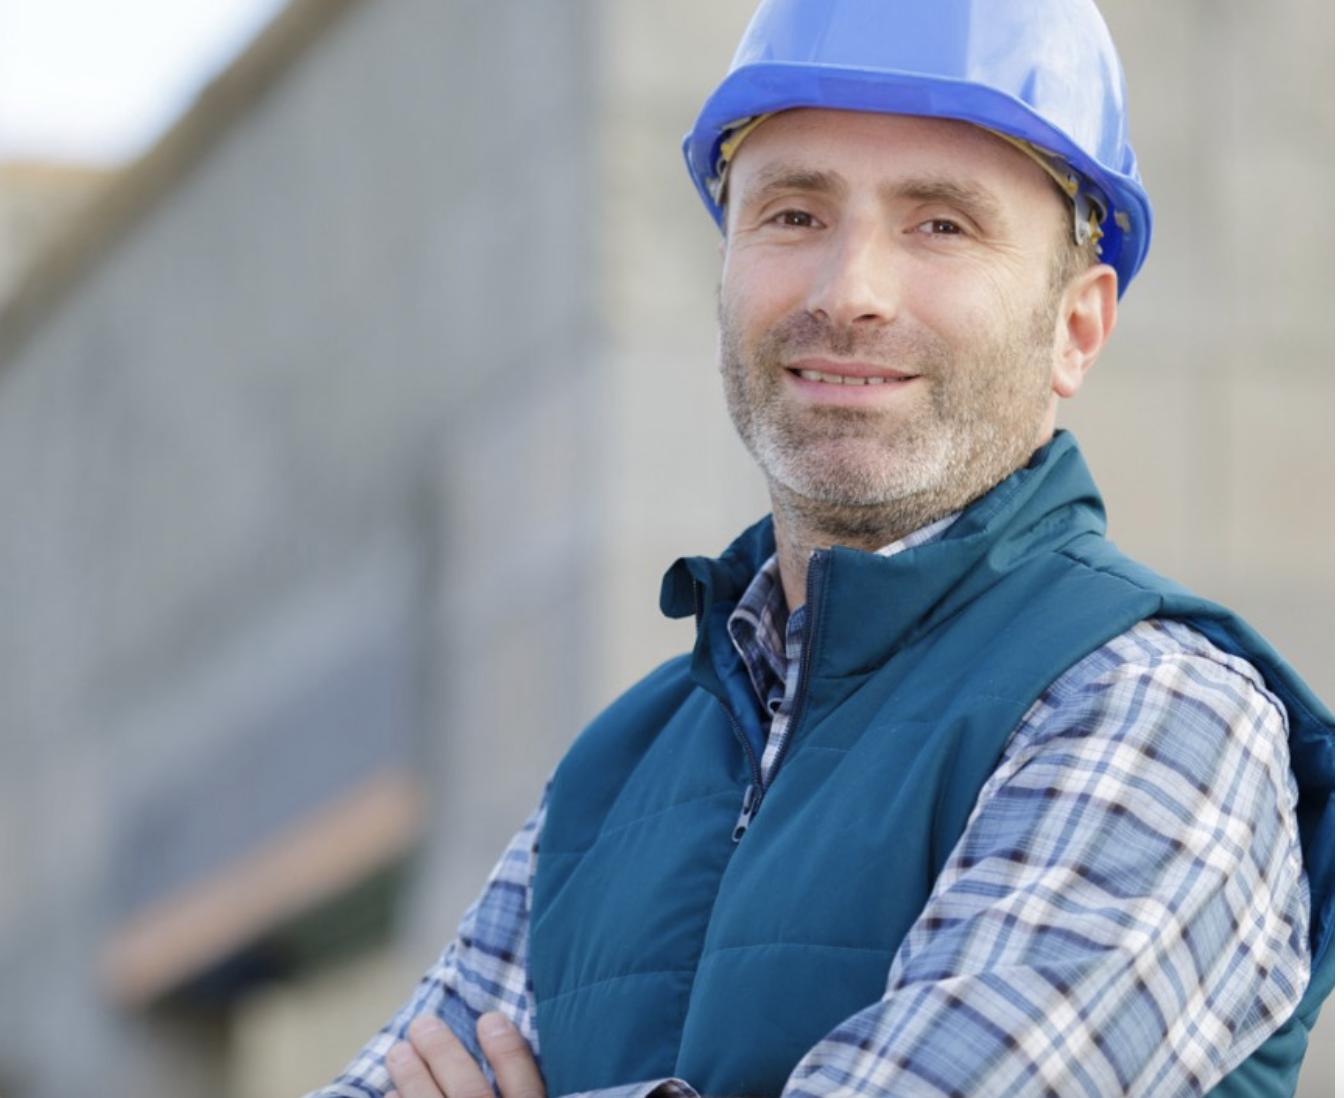 a man wearing a hard hat and vest